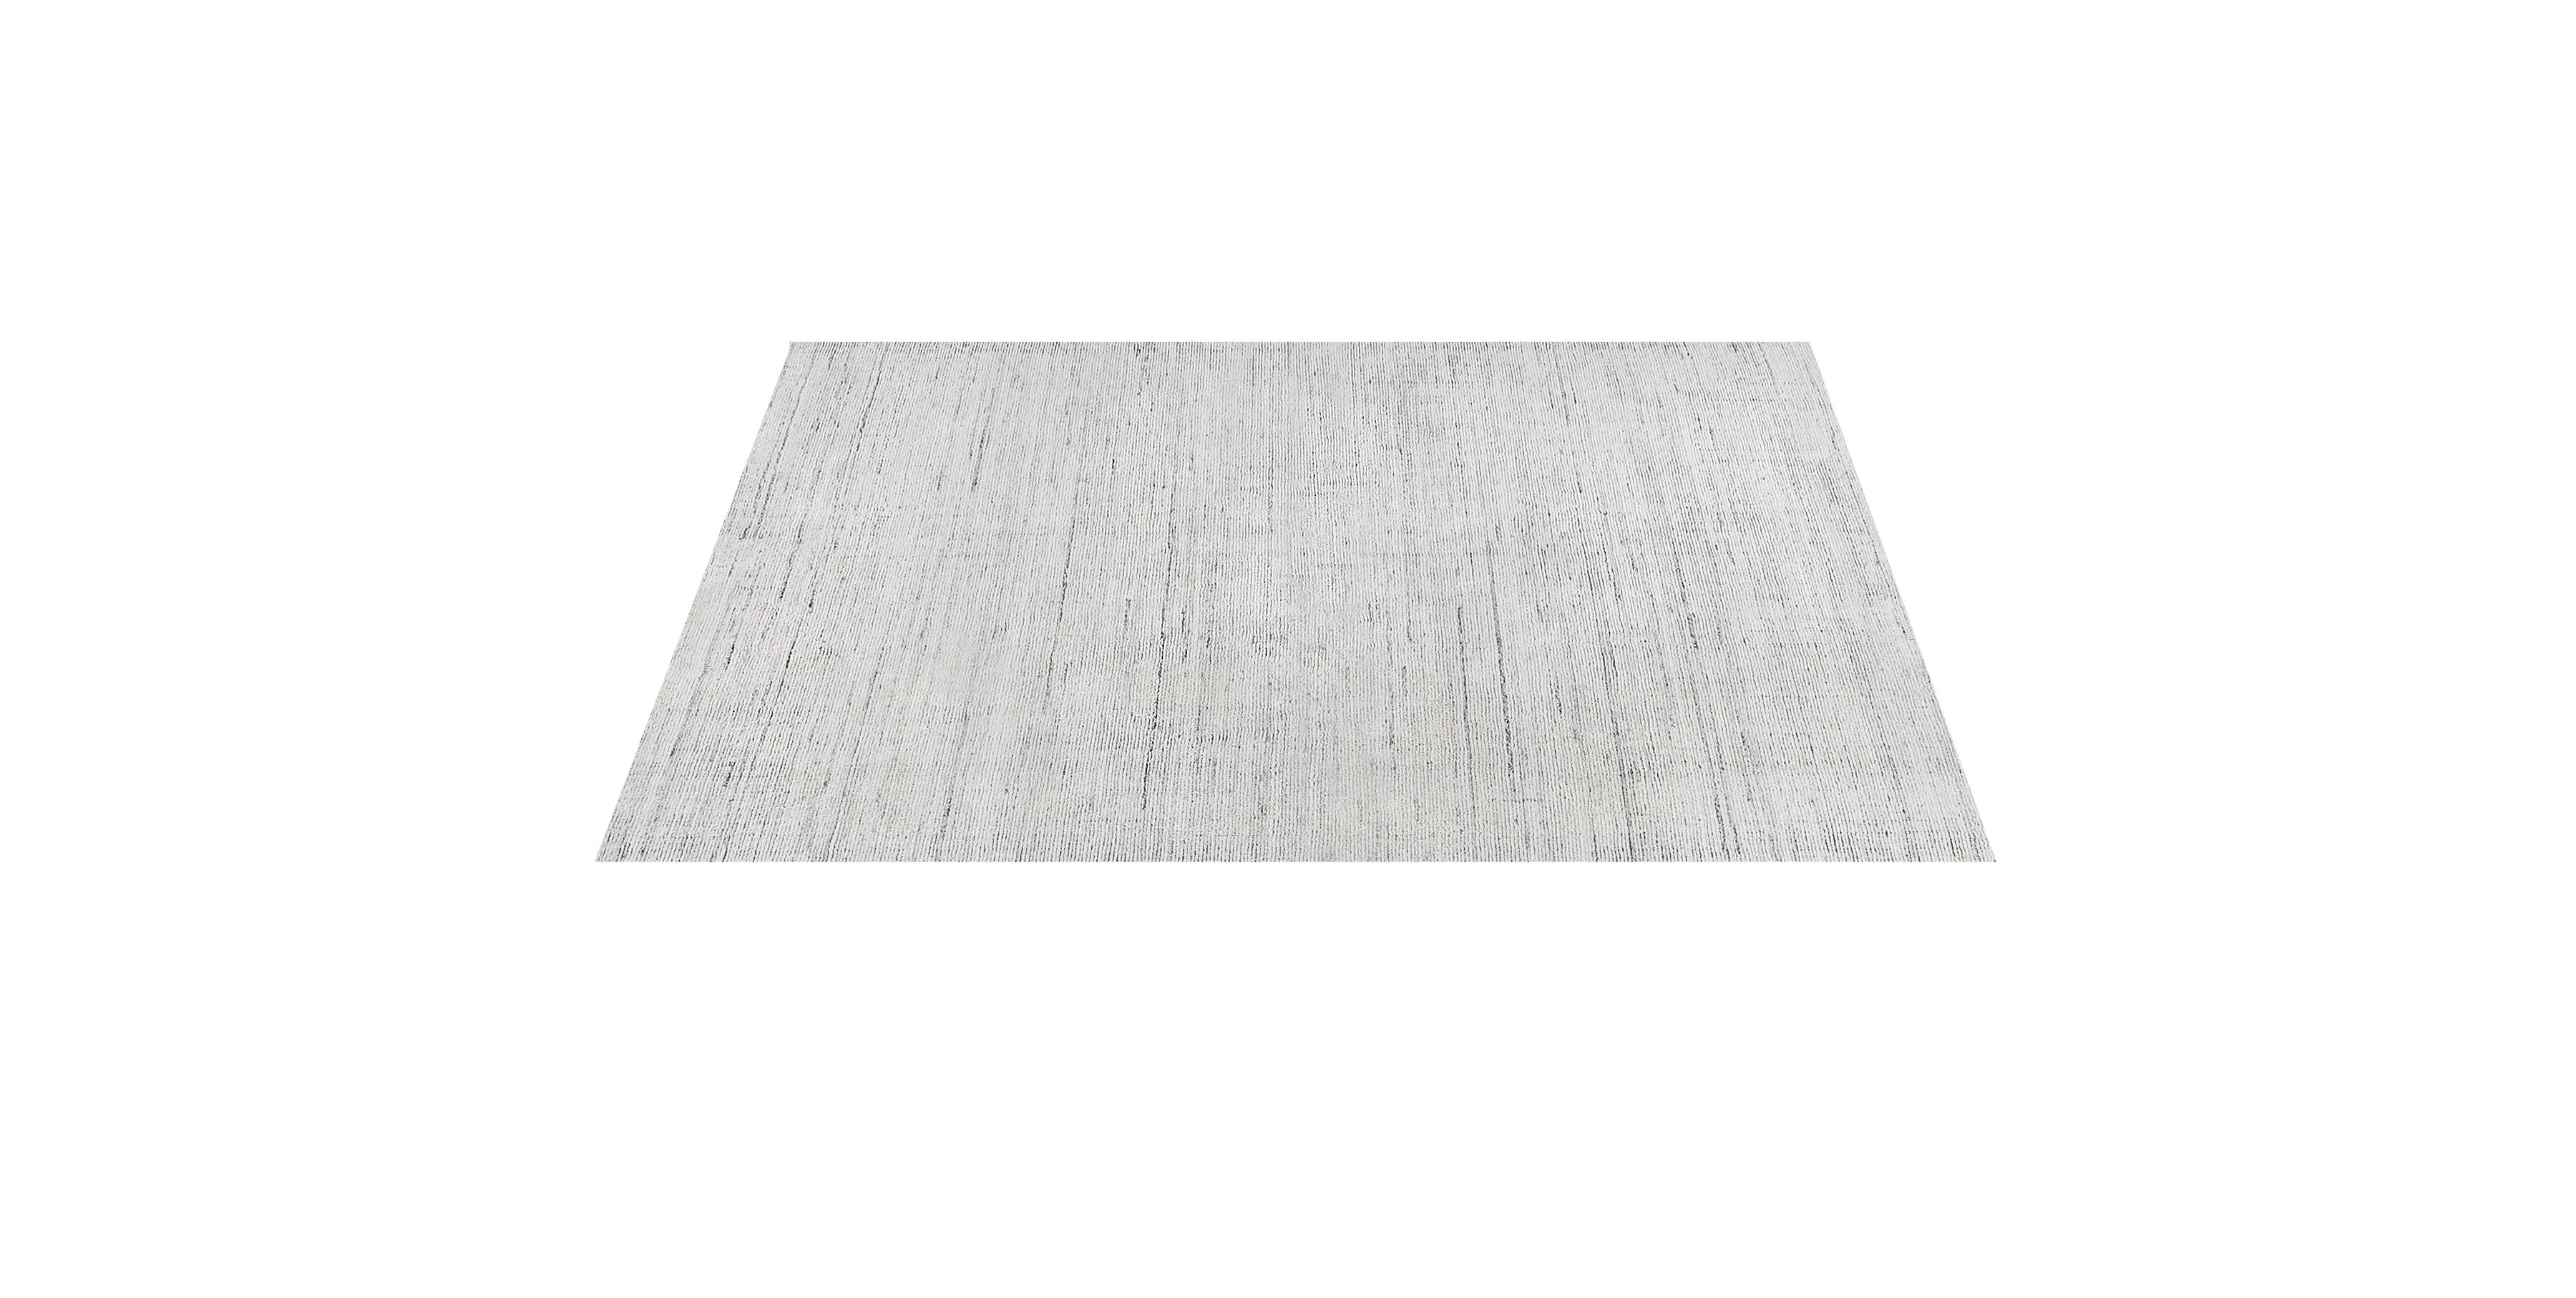 For Sale: Beige (Performance Distressed Natural) Ben Soleimani Performance Distressed Rug 9'x12' 3